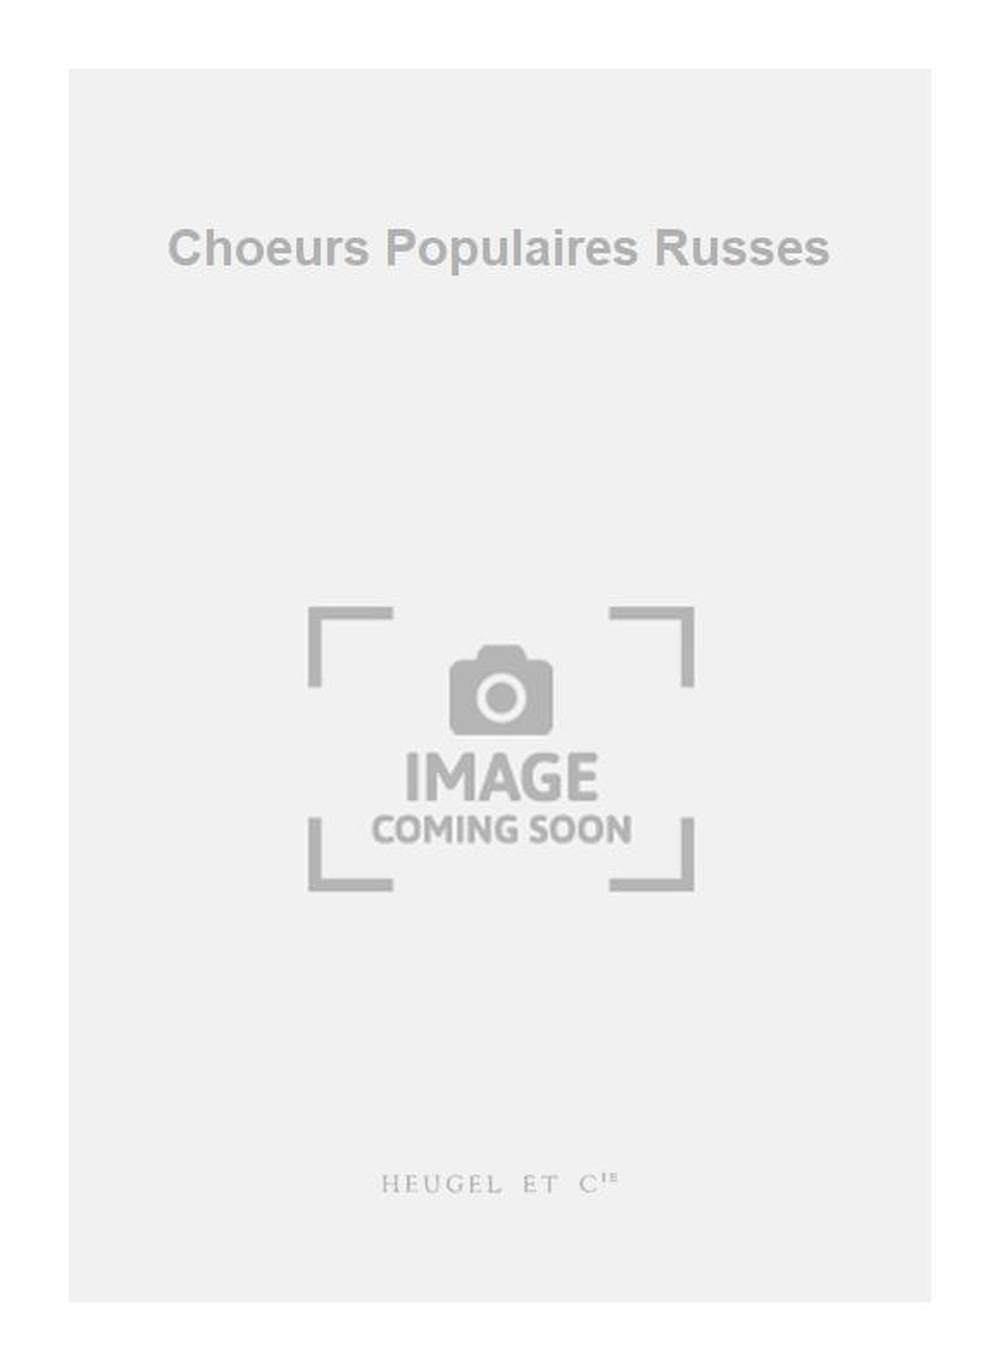 Pittion: Choeurs Populaires Russes